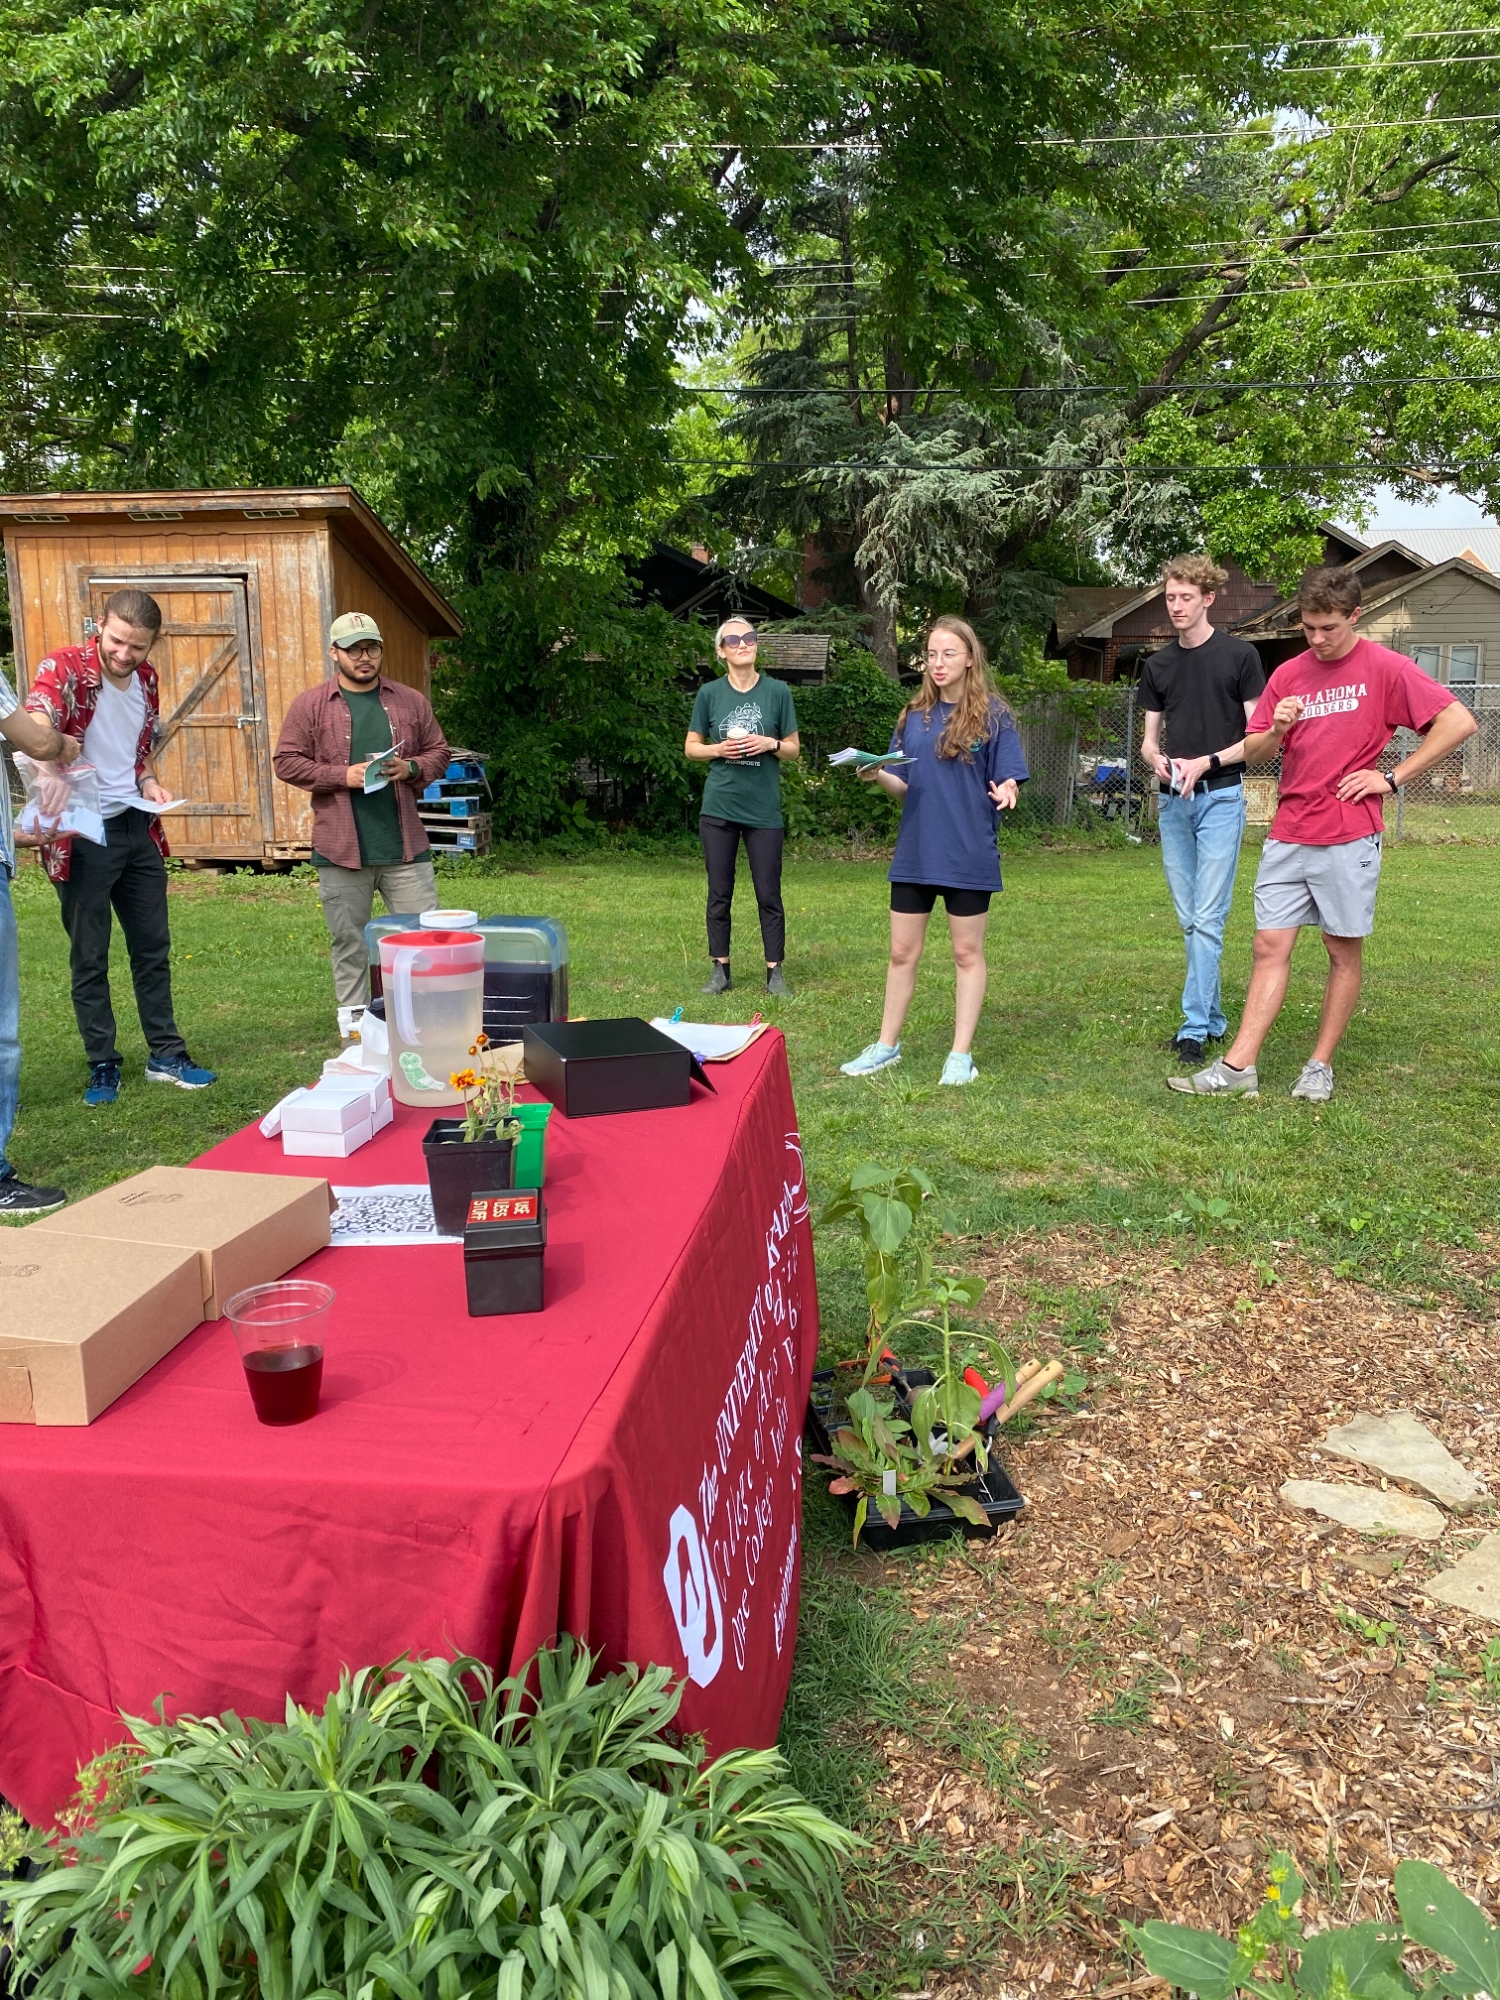 Students stand behind a table presenting at a garden event.